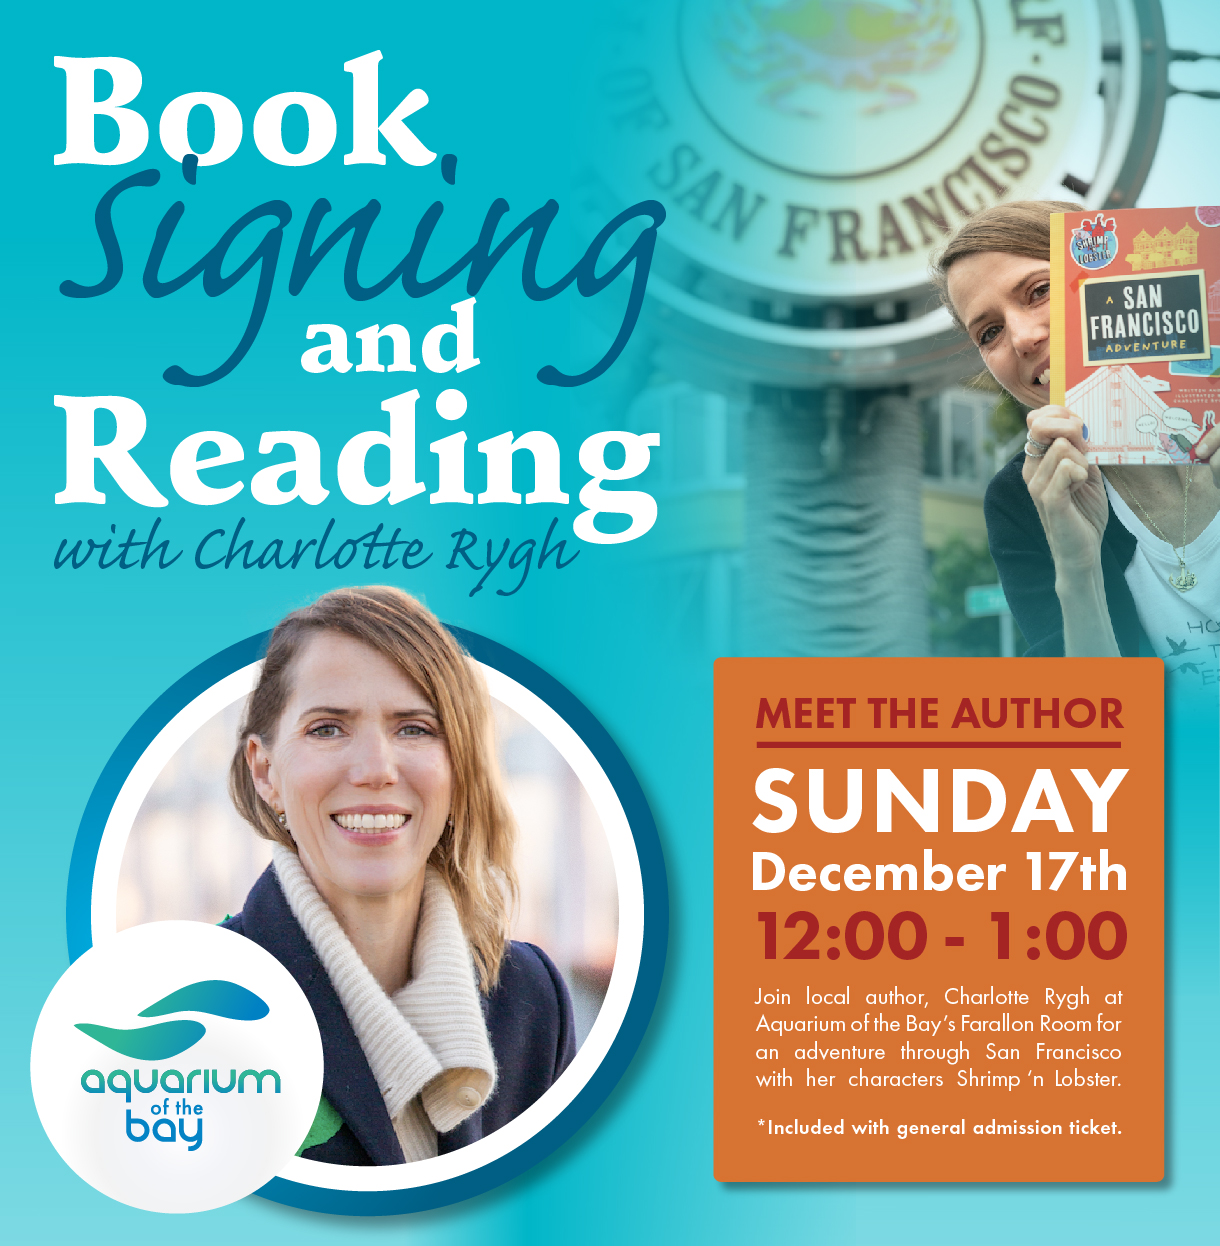 Book Signing and Reading with Charlotte Rygh